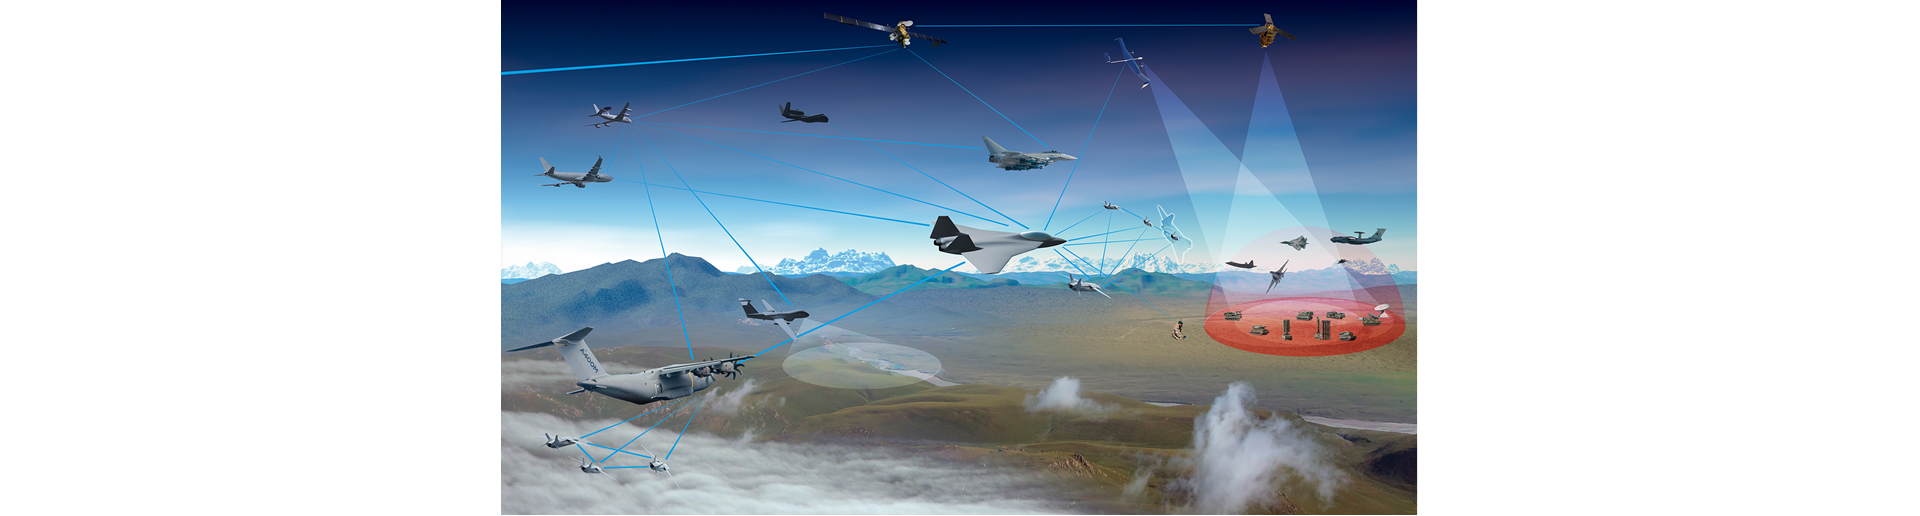 Future Combat Air System Owning The Sky With The Next Generation